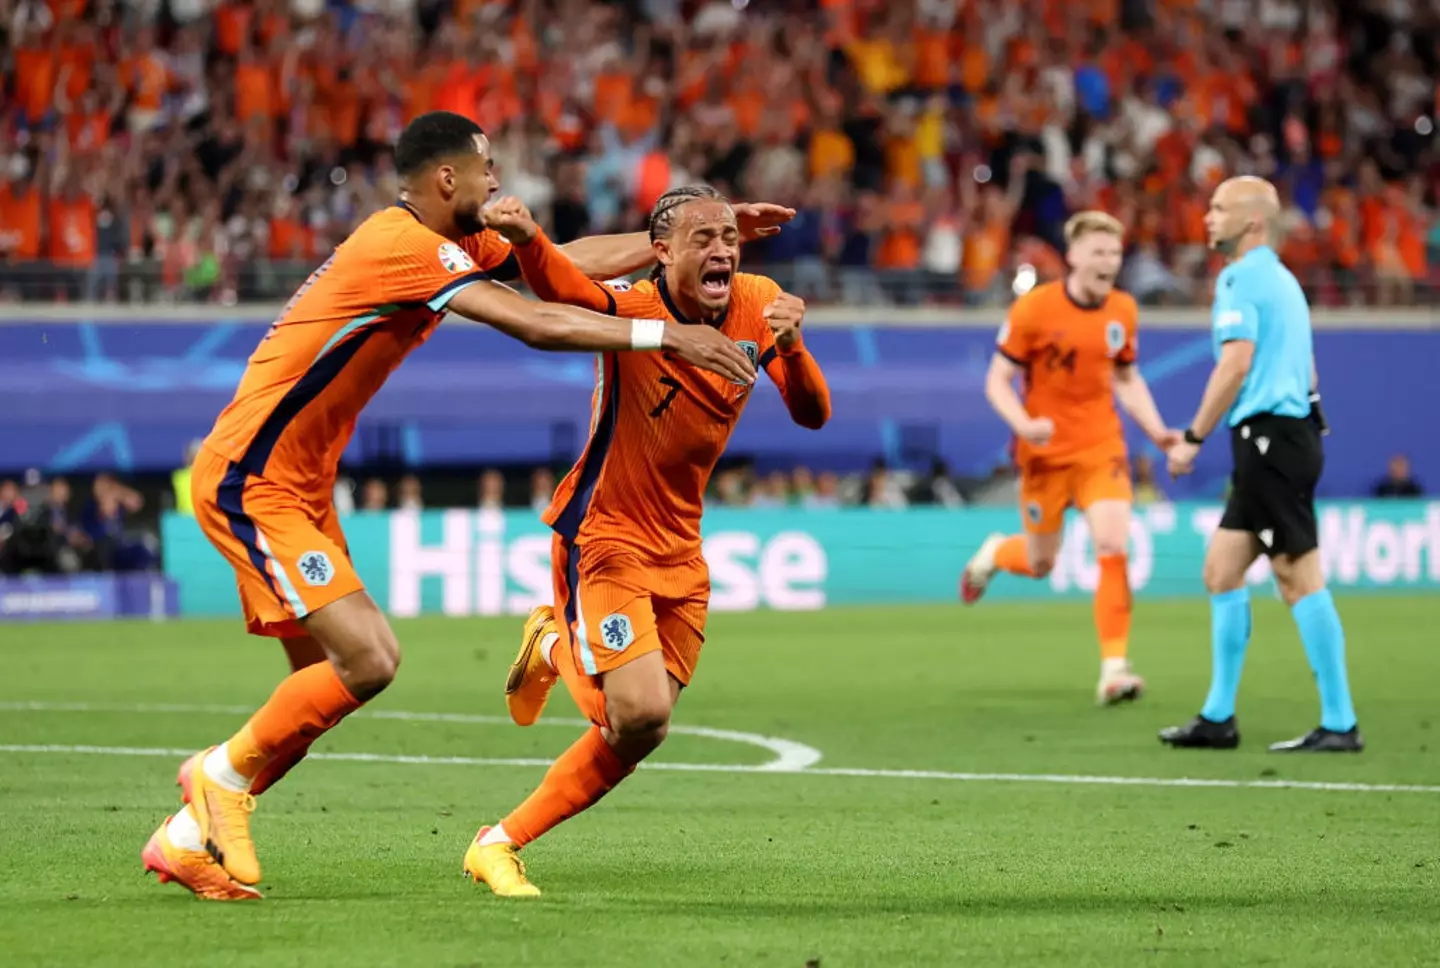 Xavi Simons thought he had scored the winner for The Netherlands in the 70th minute, but the goal was disallowed (Image: Getty)